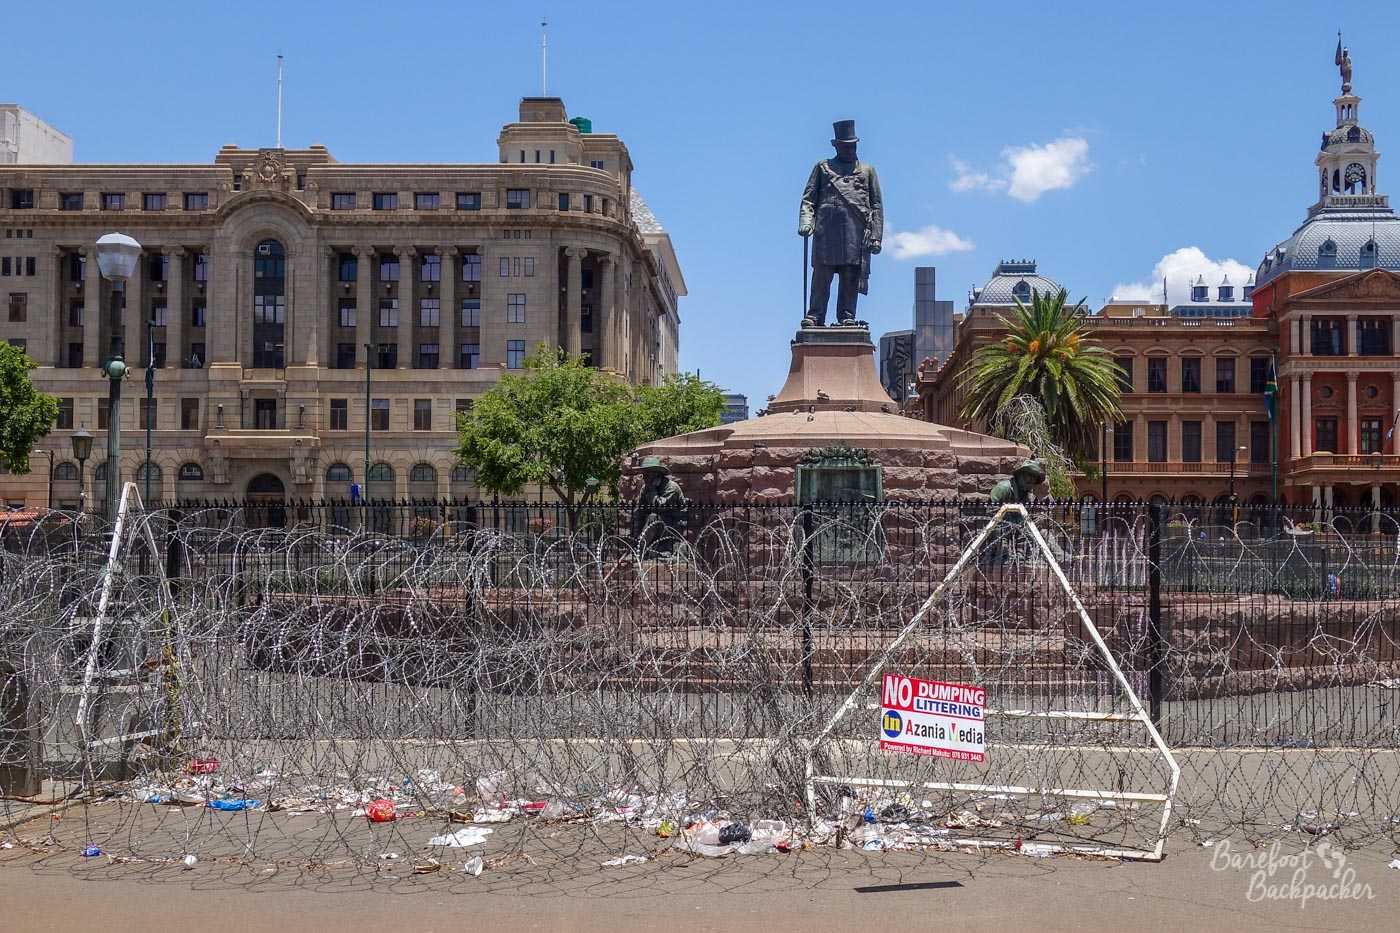 The Paul Kruger statue in the centre of Pretoria, surrounded by barbed wire and lots of litter